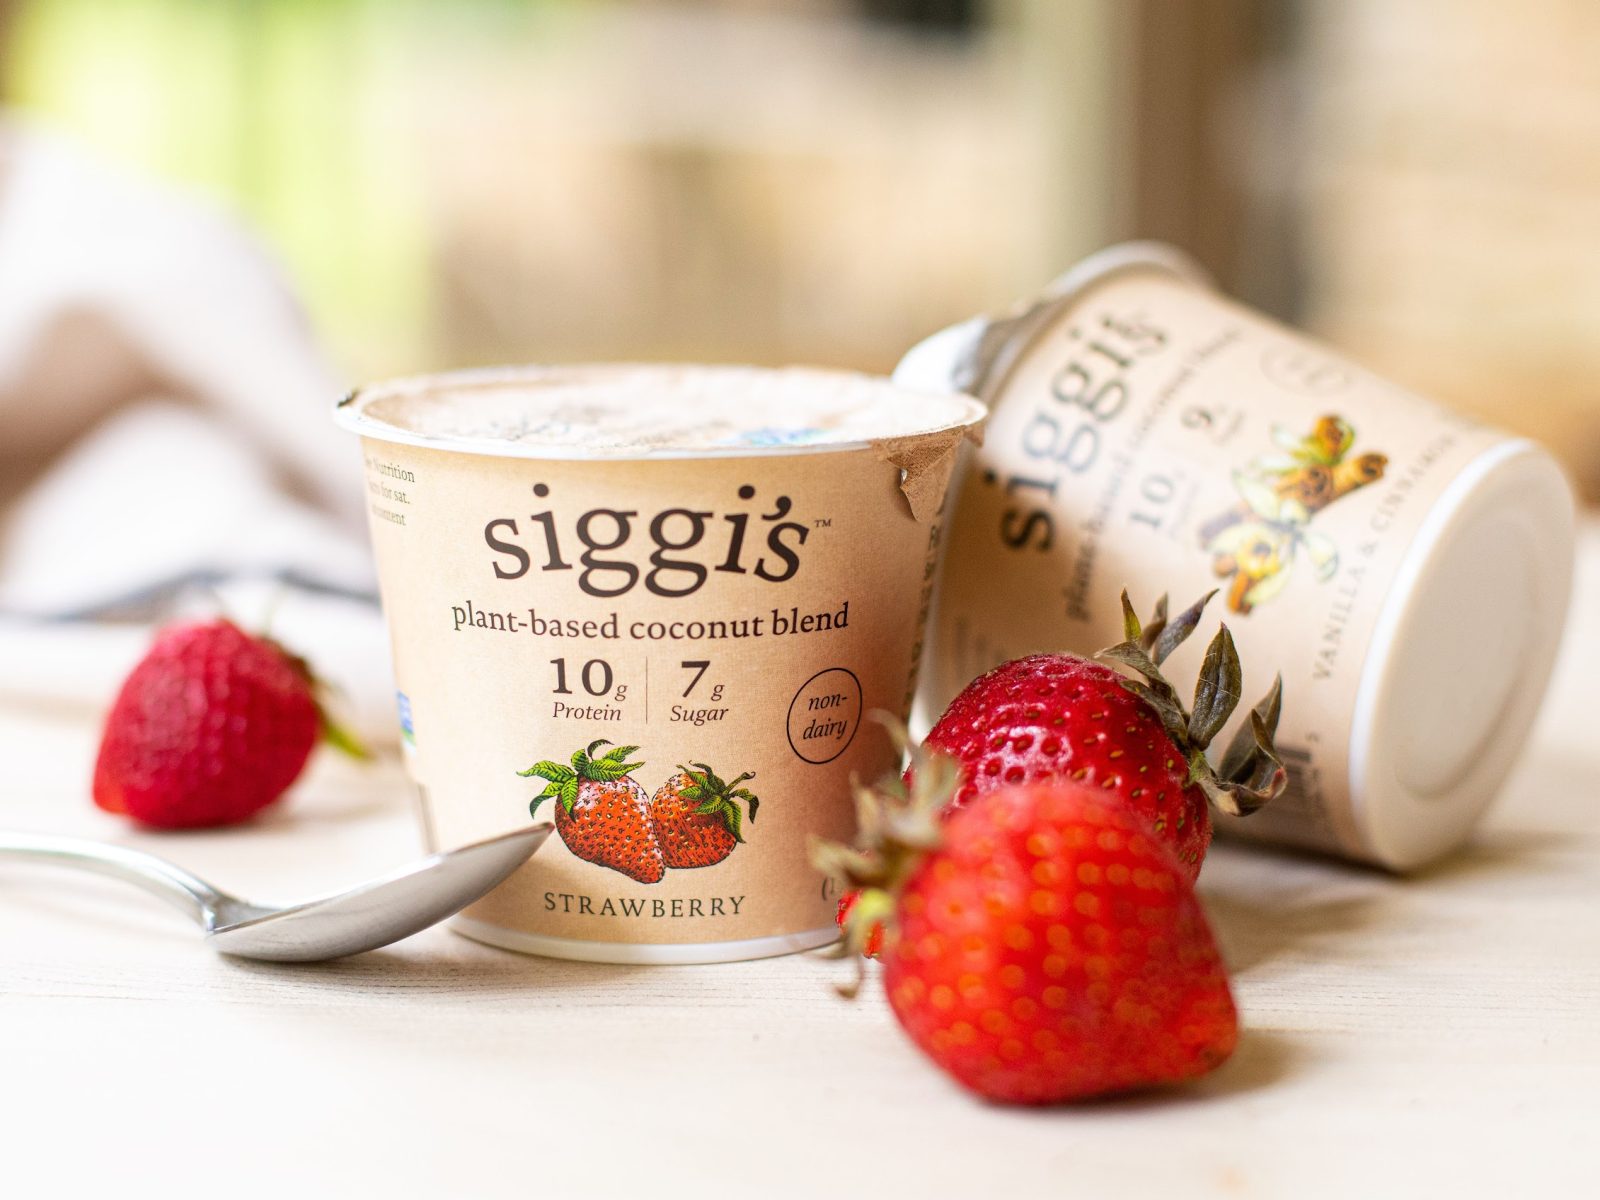 Try siggi’s plant based For FREE At Publix on I Heart Publix